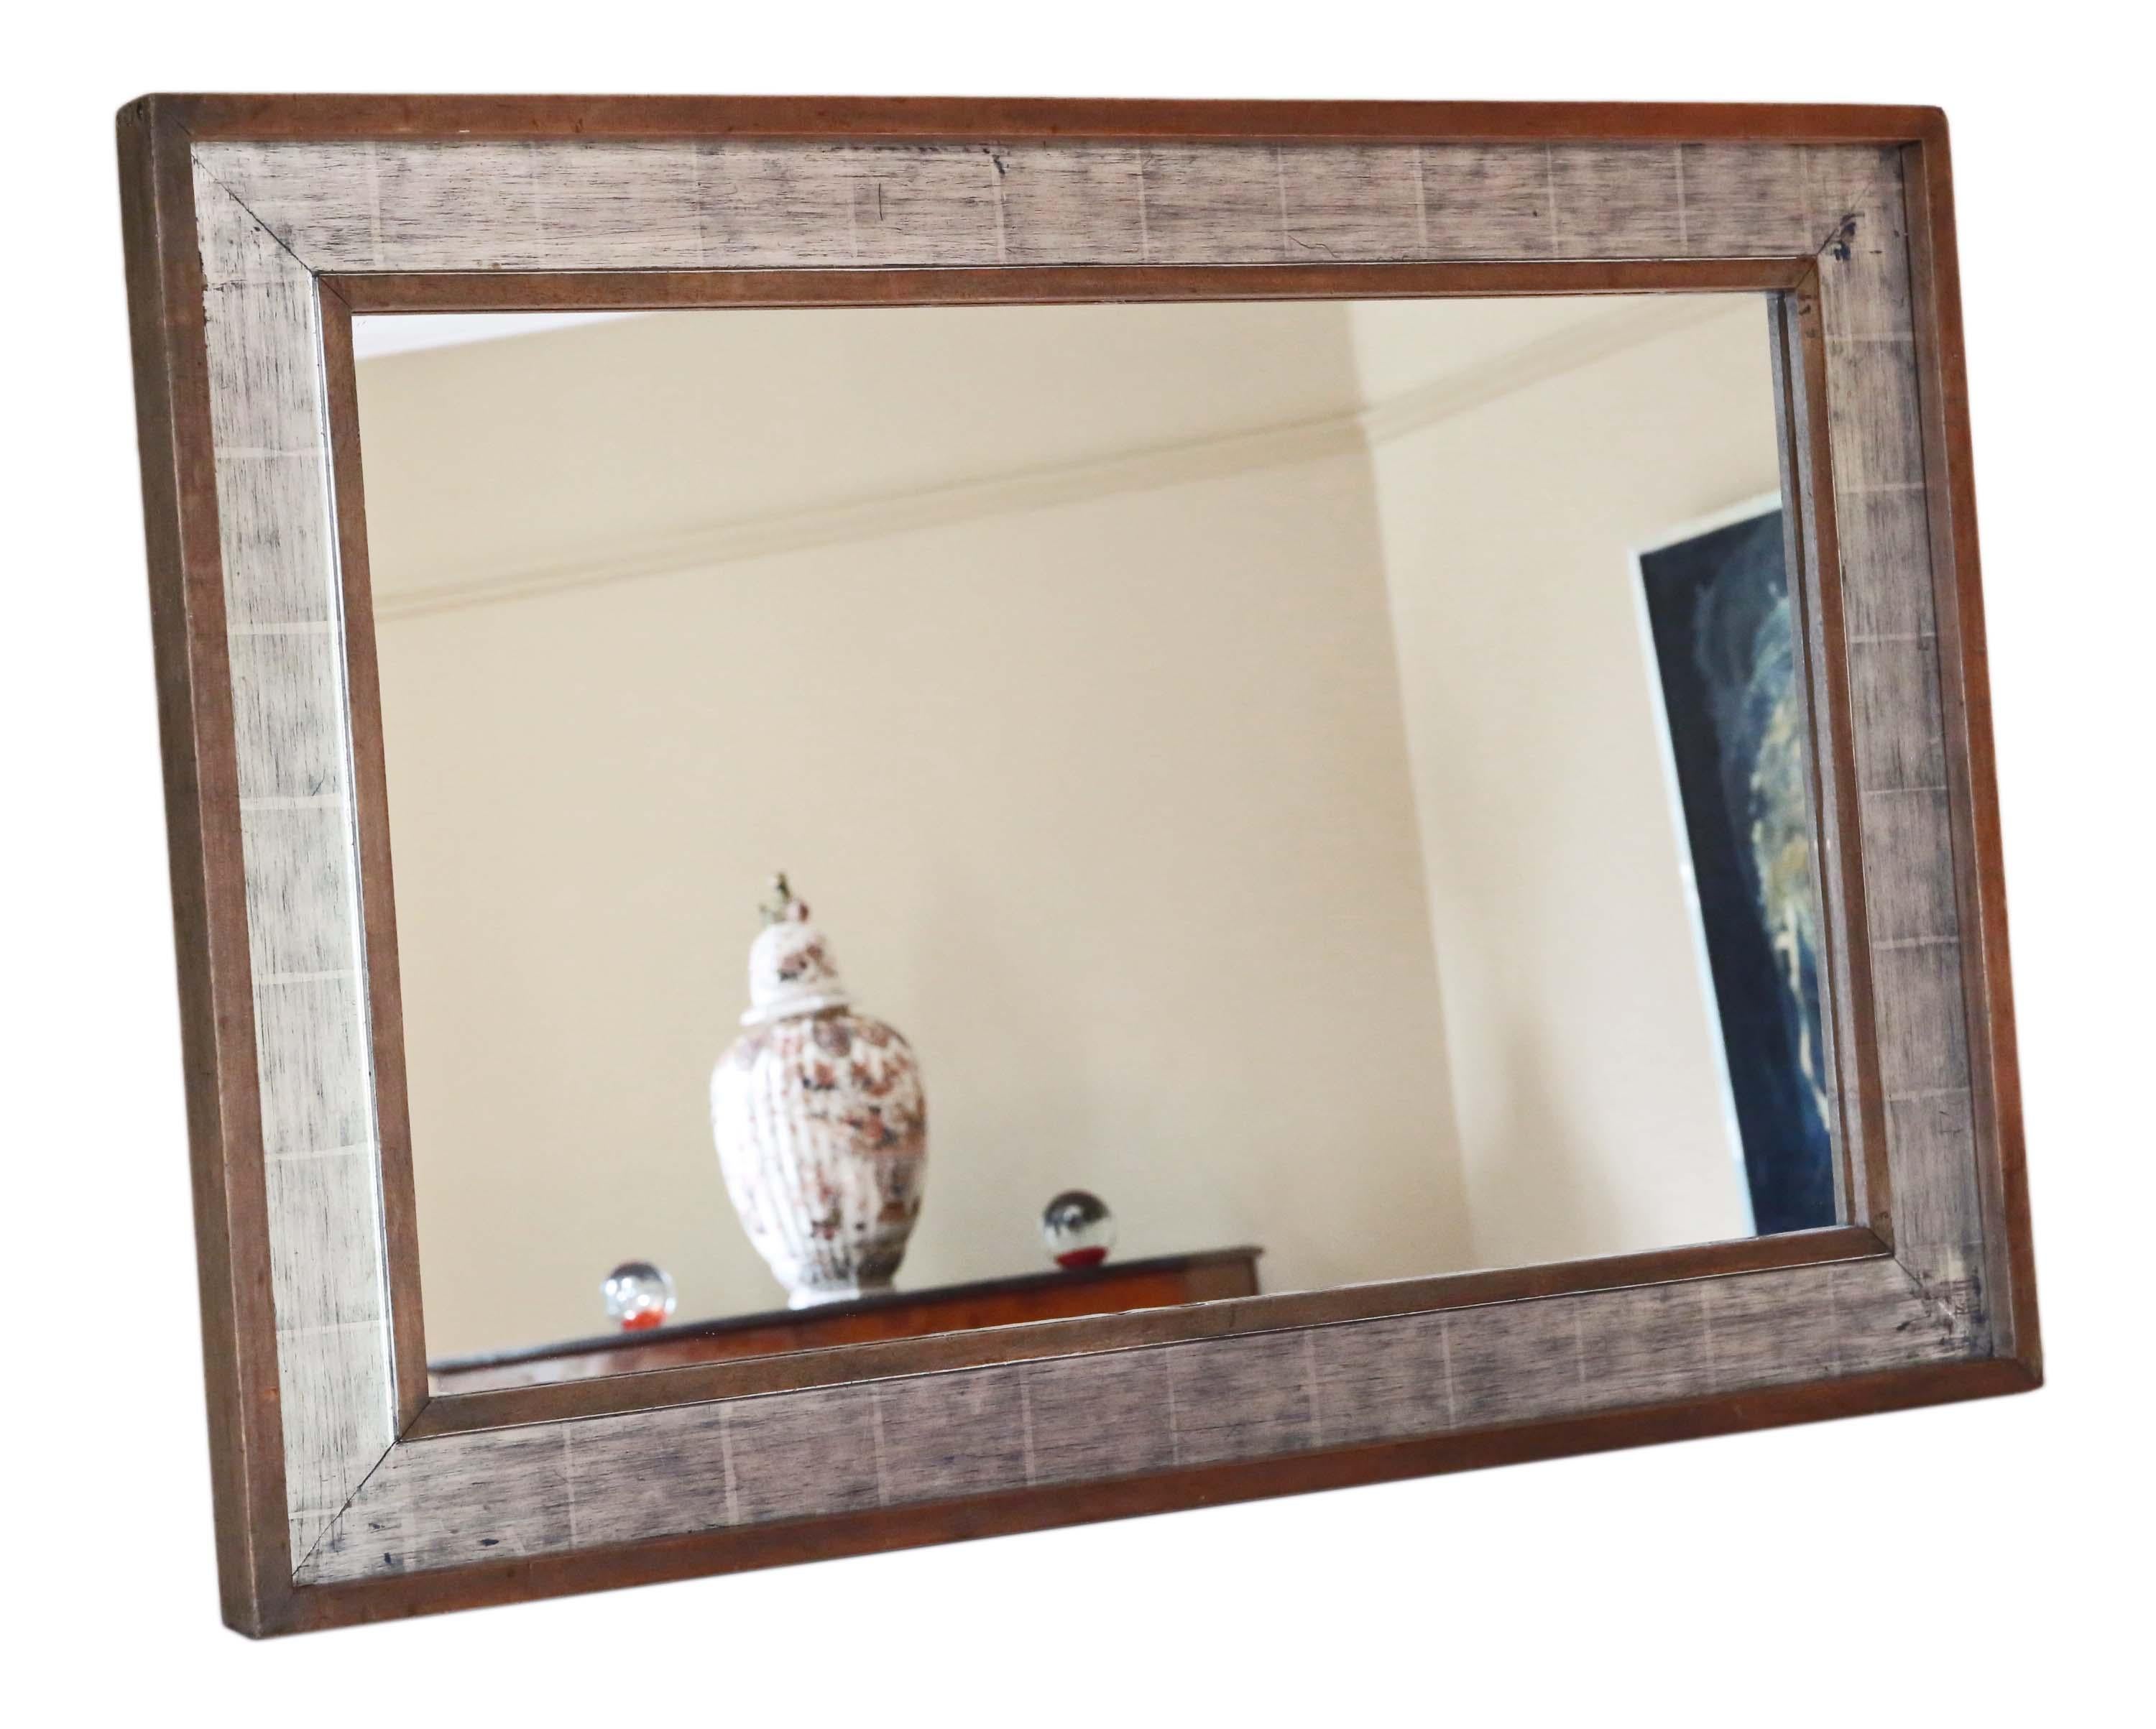 Large quality silver gilt and mahogany wall mirror mid-20th century.
This is a lovely unusual mirror, with simple clean lines.
Would look amazing in the right location. No woodworm or loose joints.
The glass is in very good condition